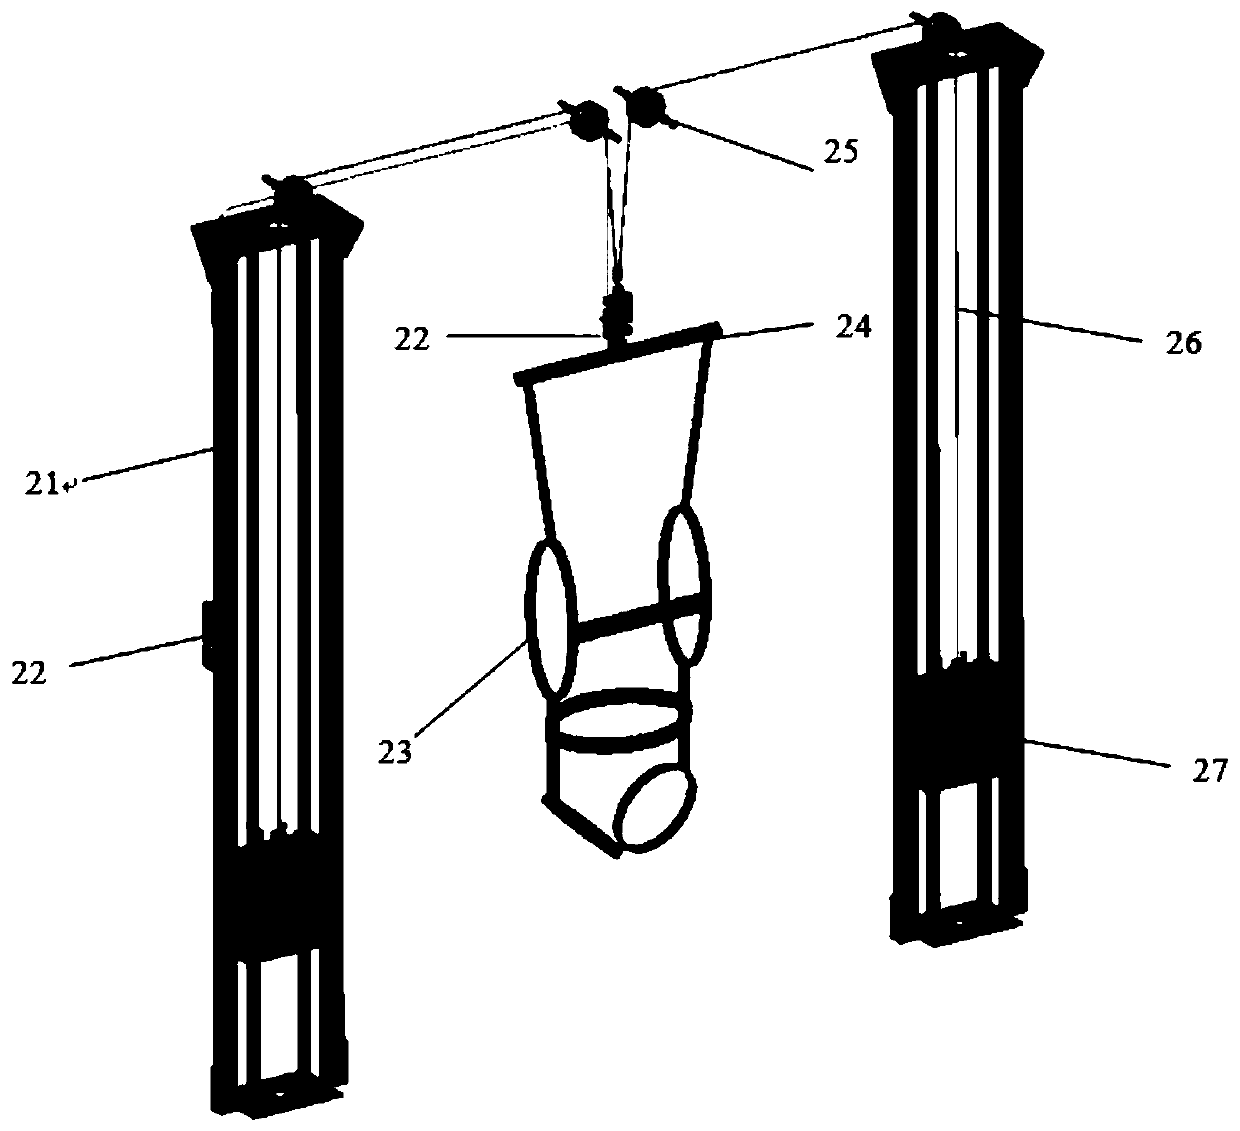 A kind of follow-up suspension type low-gravity simulation device for anthropometric measurement and training